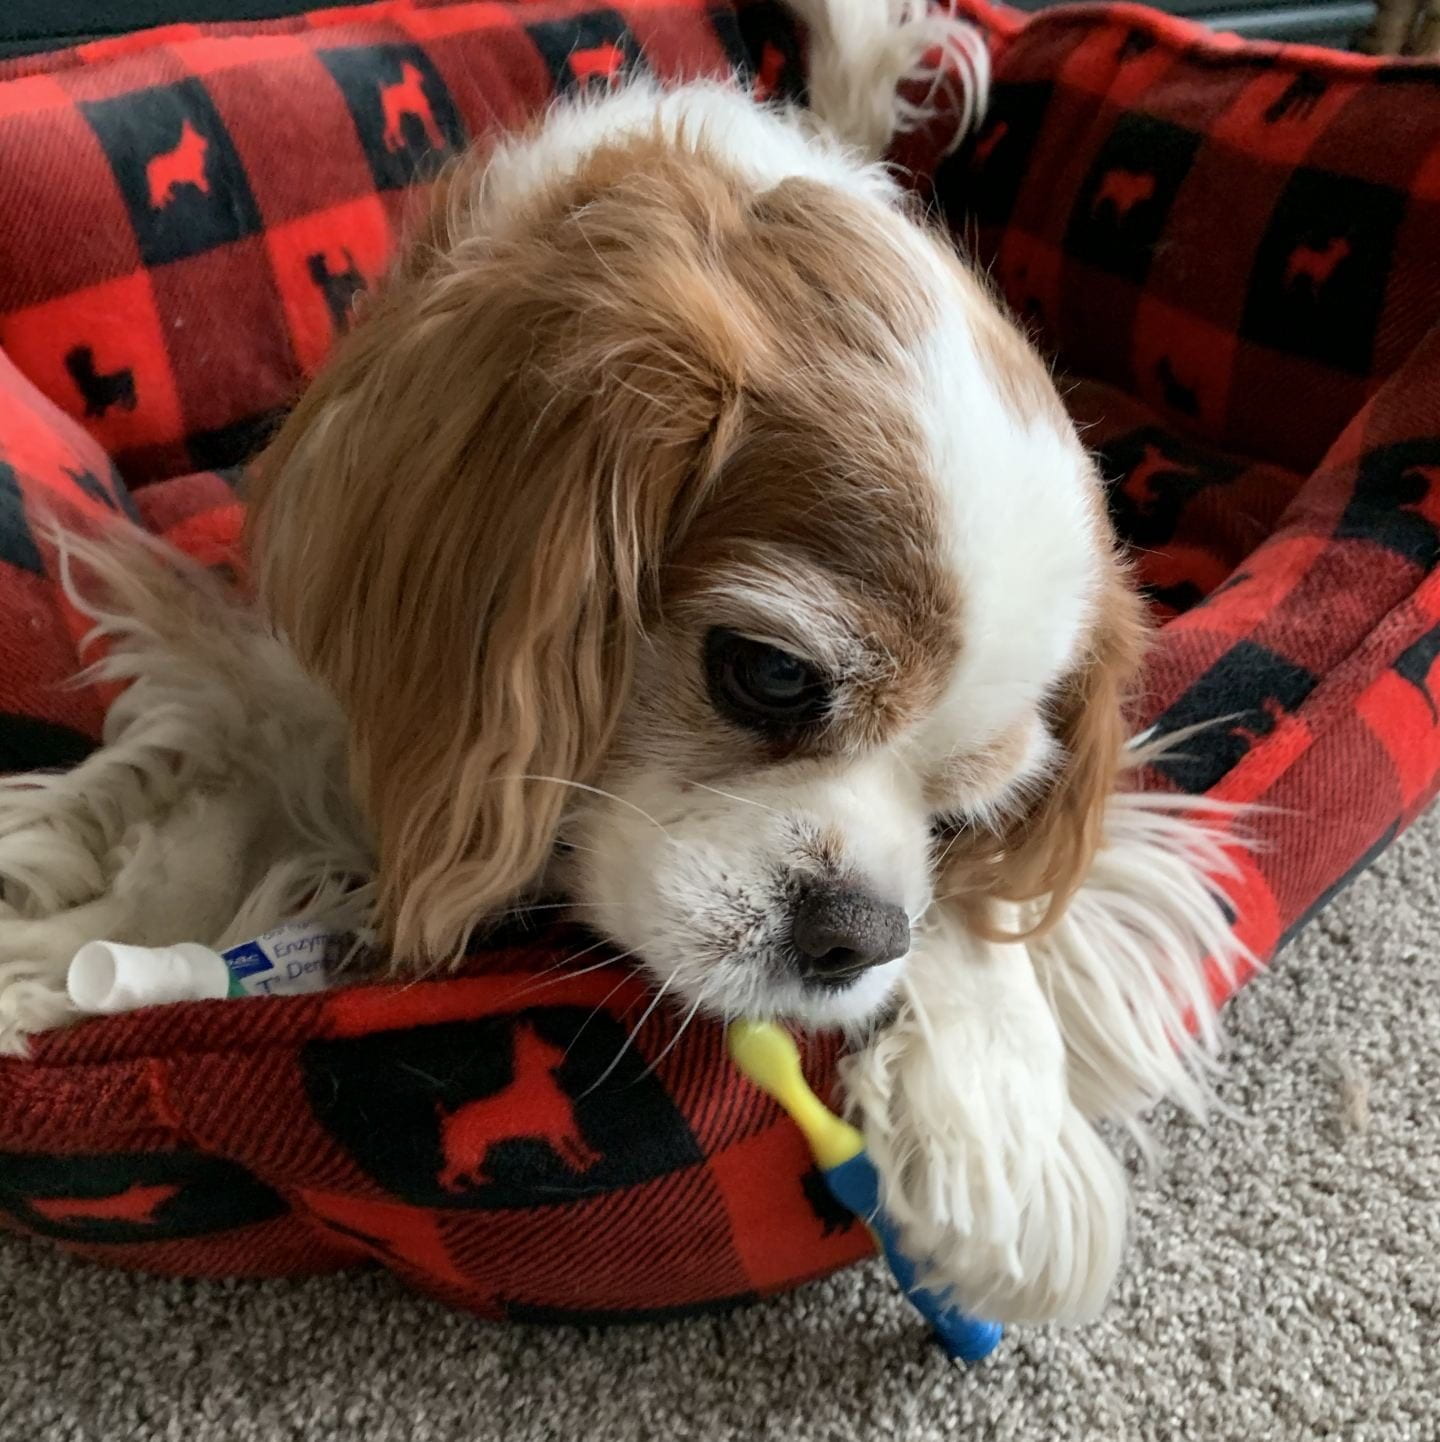 A small dog holding a toothbrush in it's own bed.